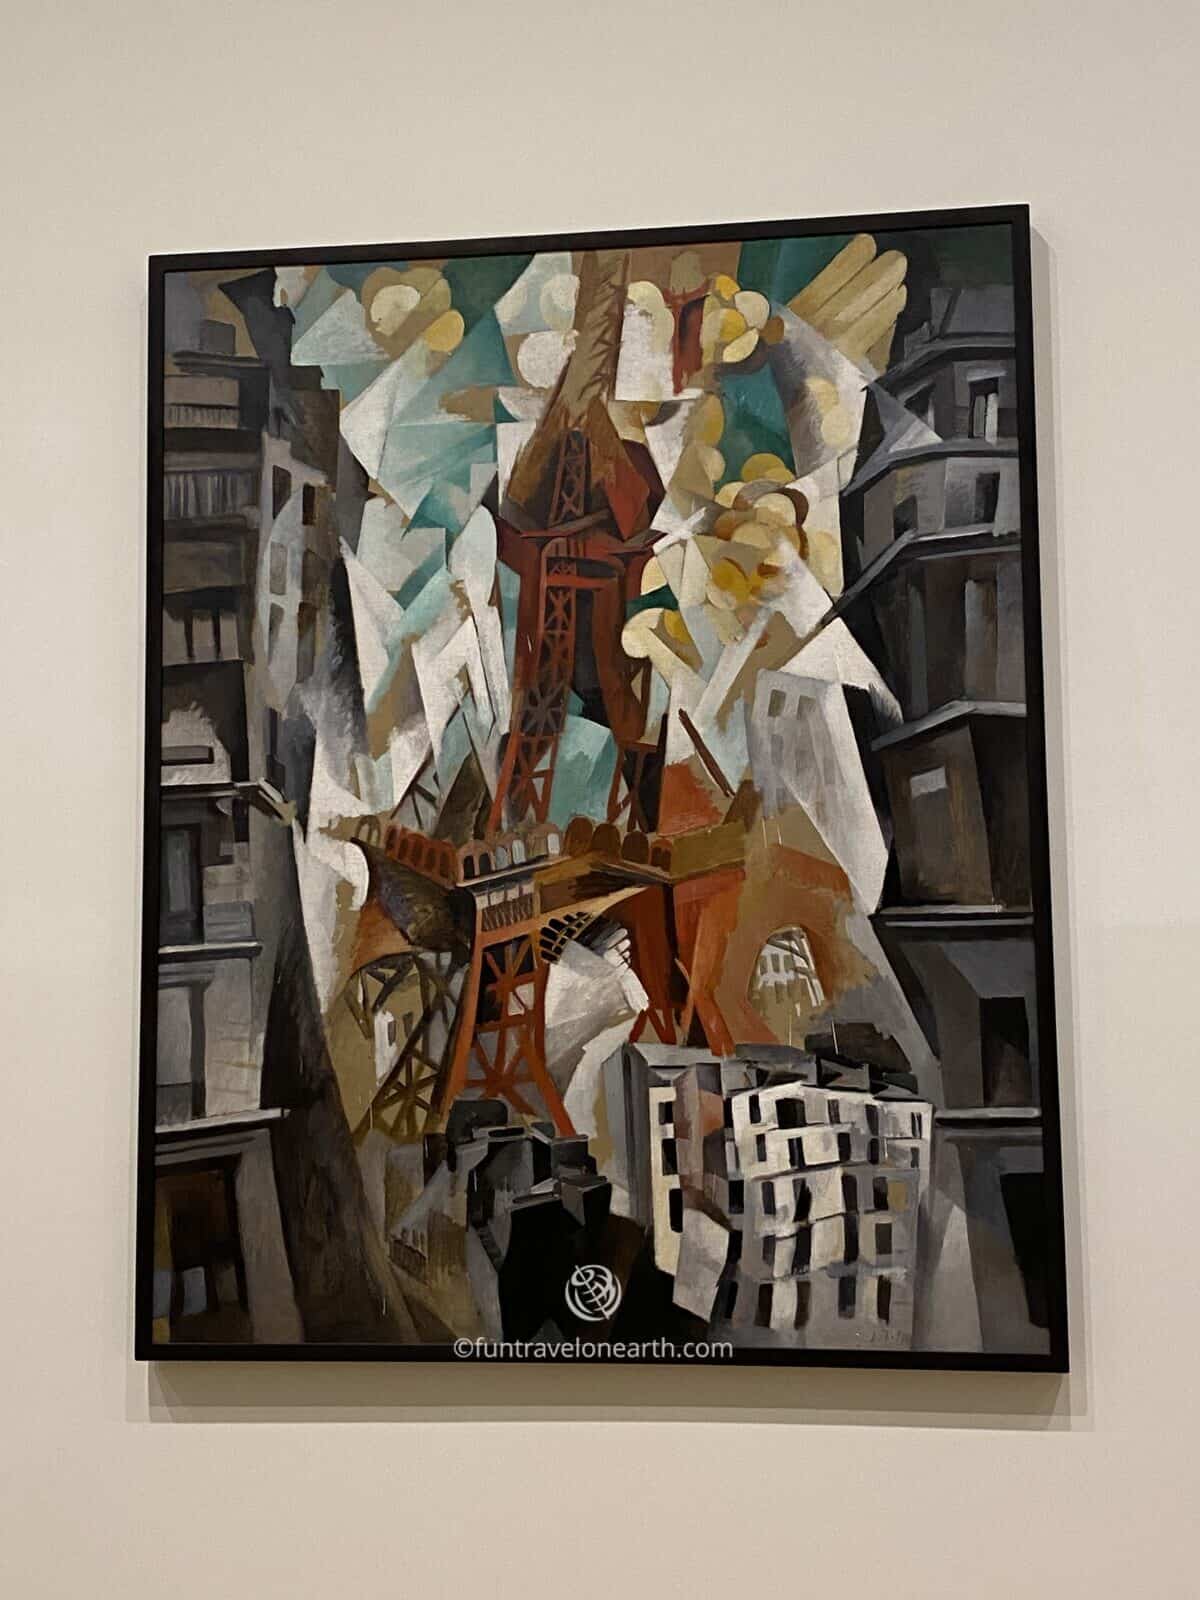 Robert Delaunay "Champs de Mars: The Red Tower" ,The Art Institute of Chicago